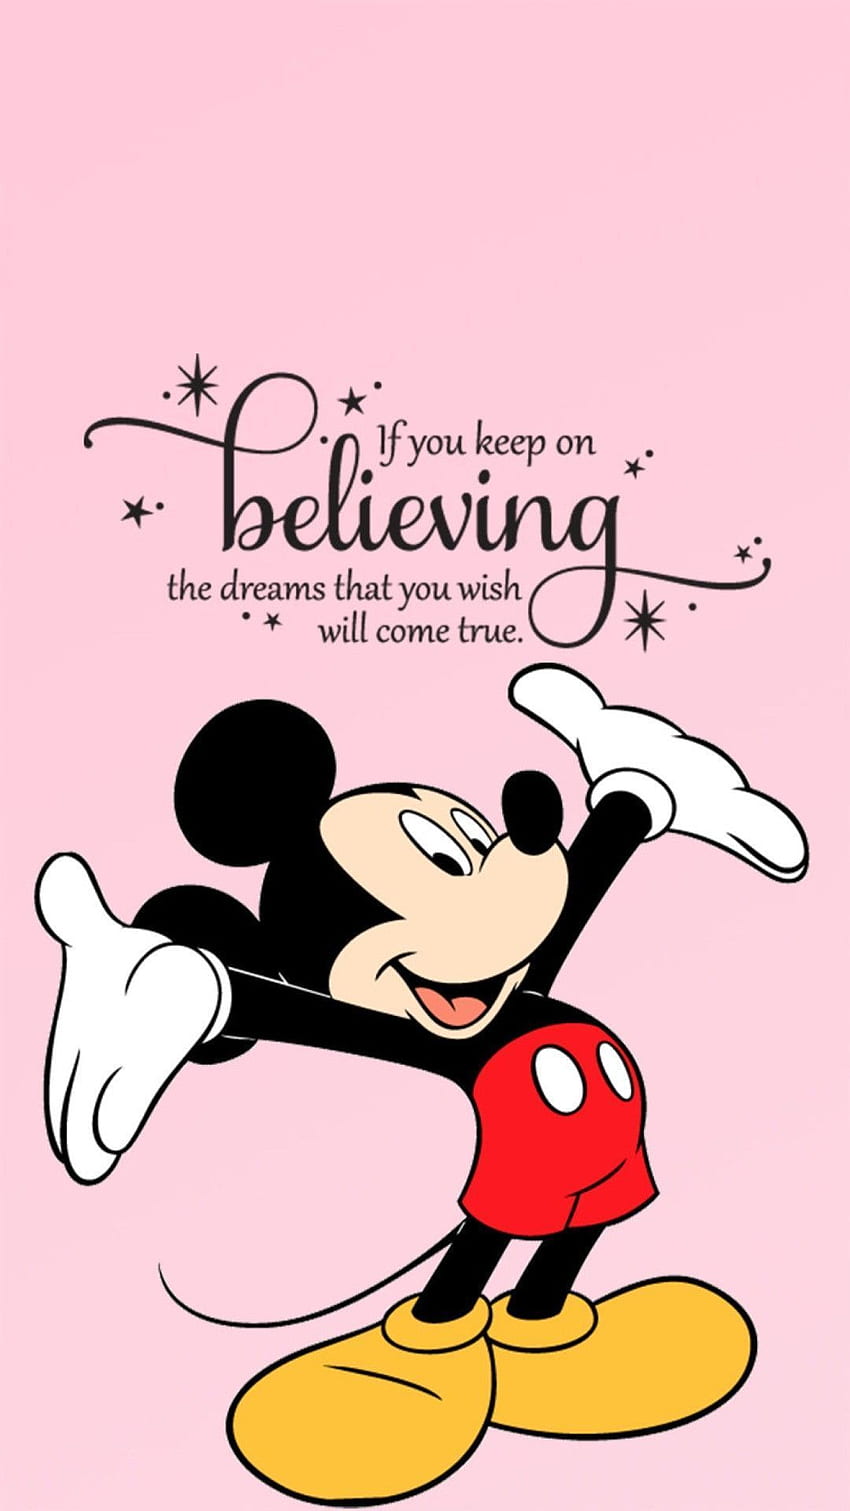 quotes by disney characters